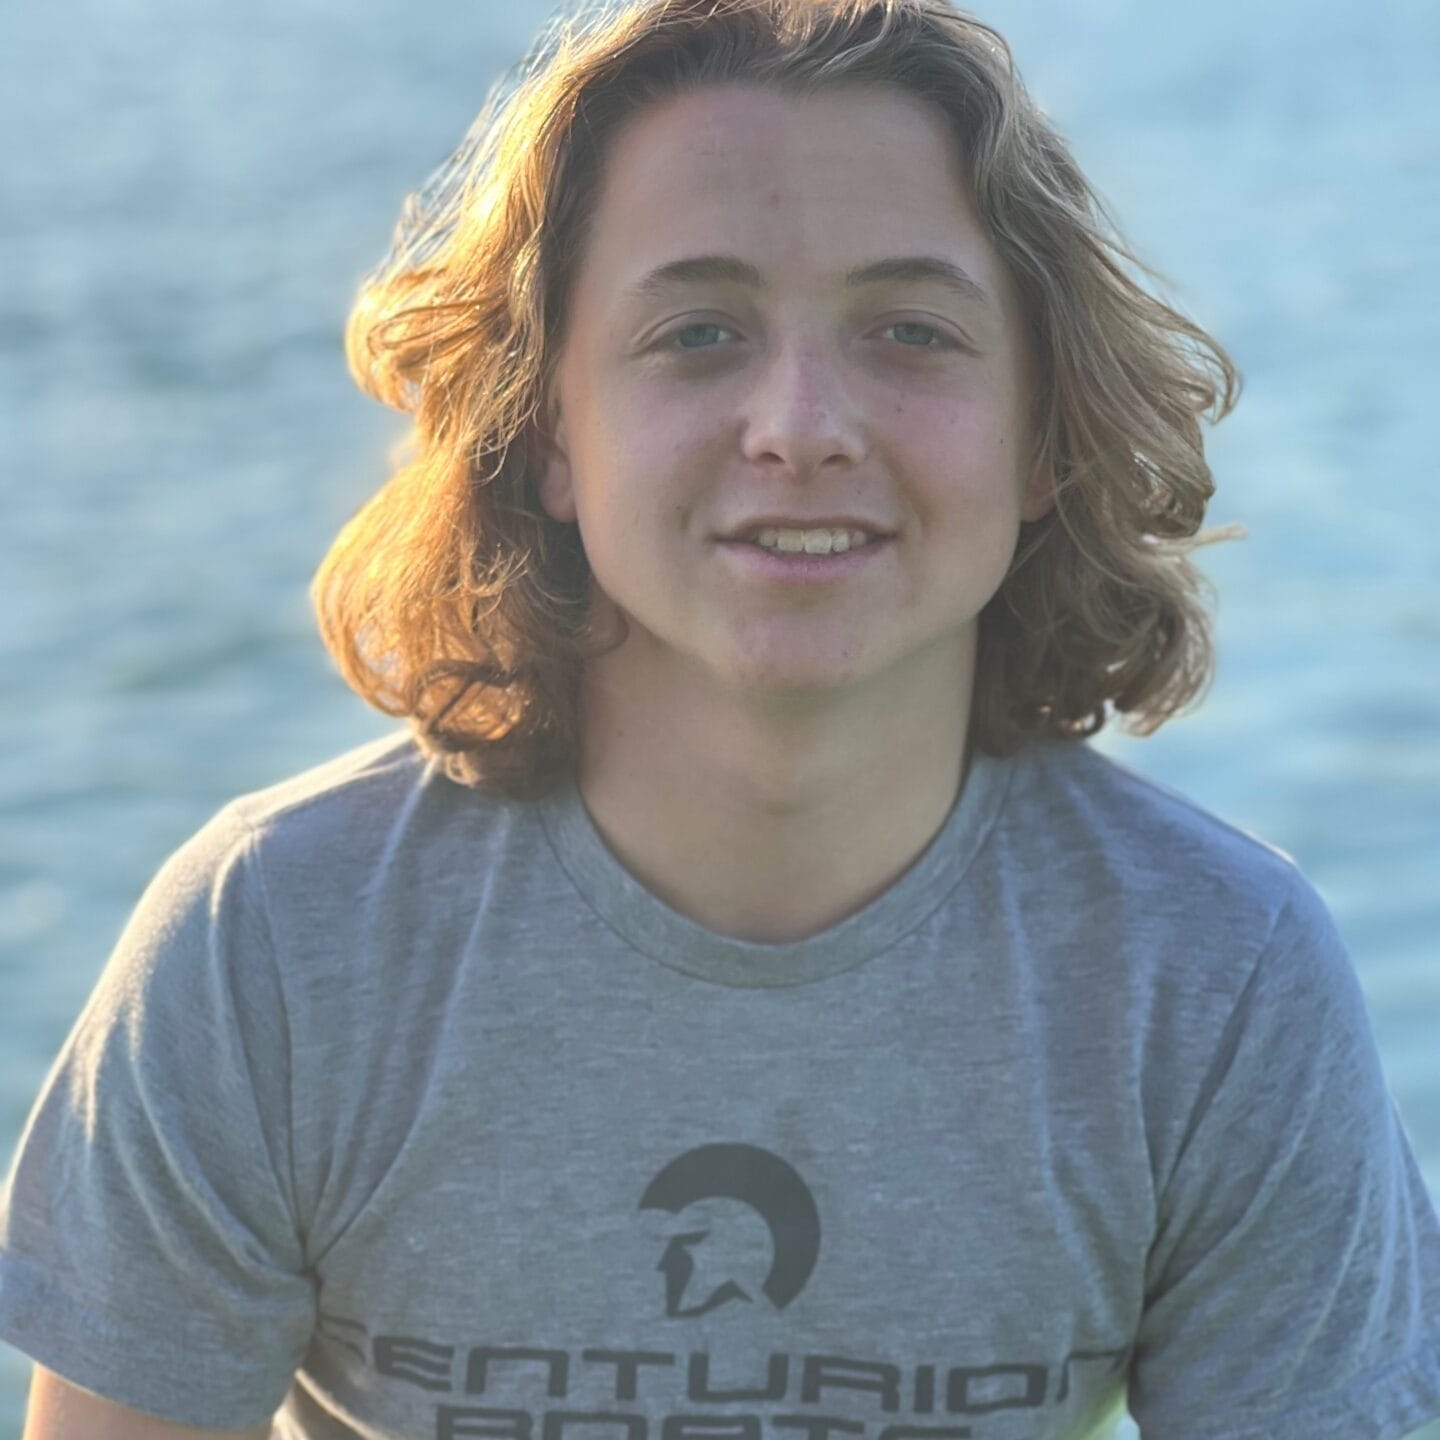 Young man named Camden Marsden with shoulder-length curly hair, smiling, wearing a gray t-shirt, with a lake in the background during sunset.